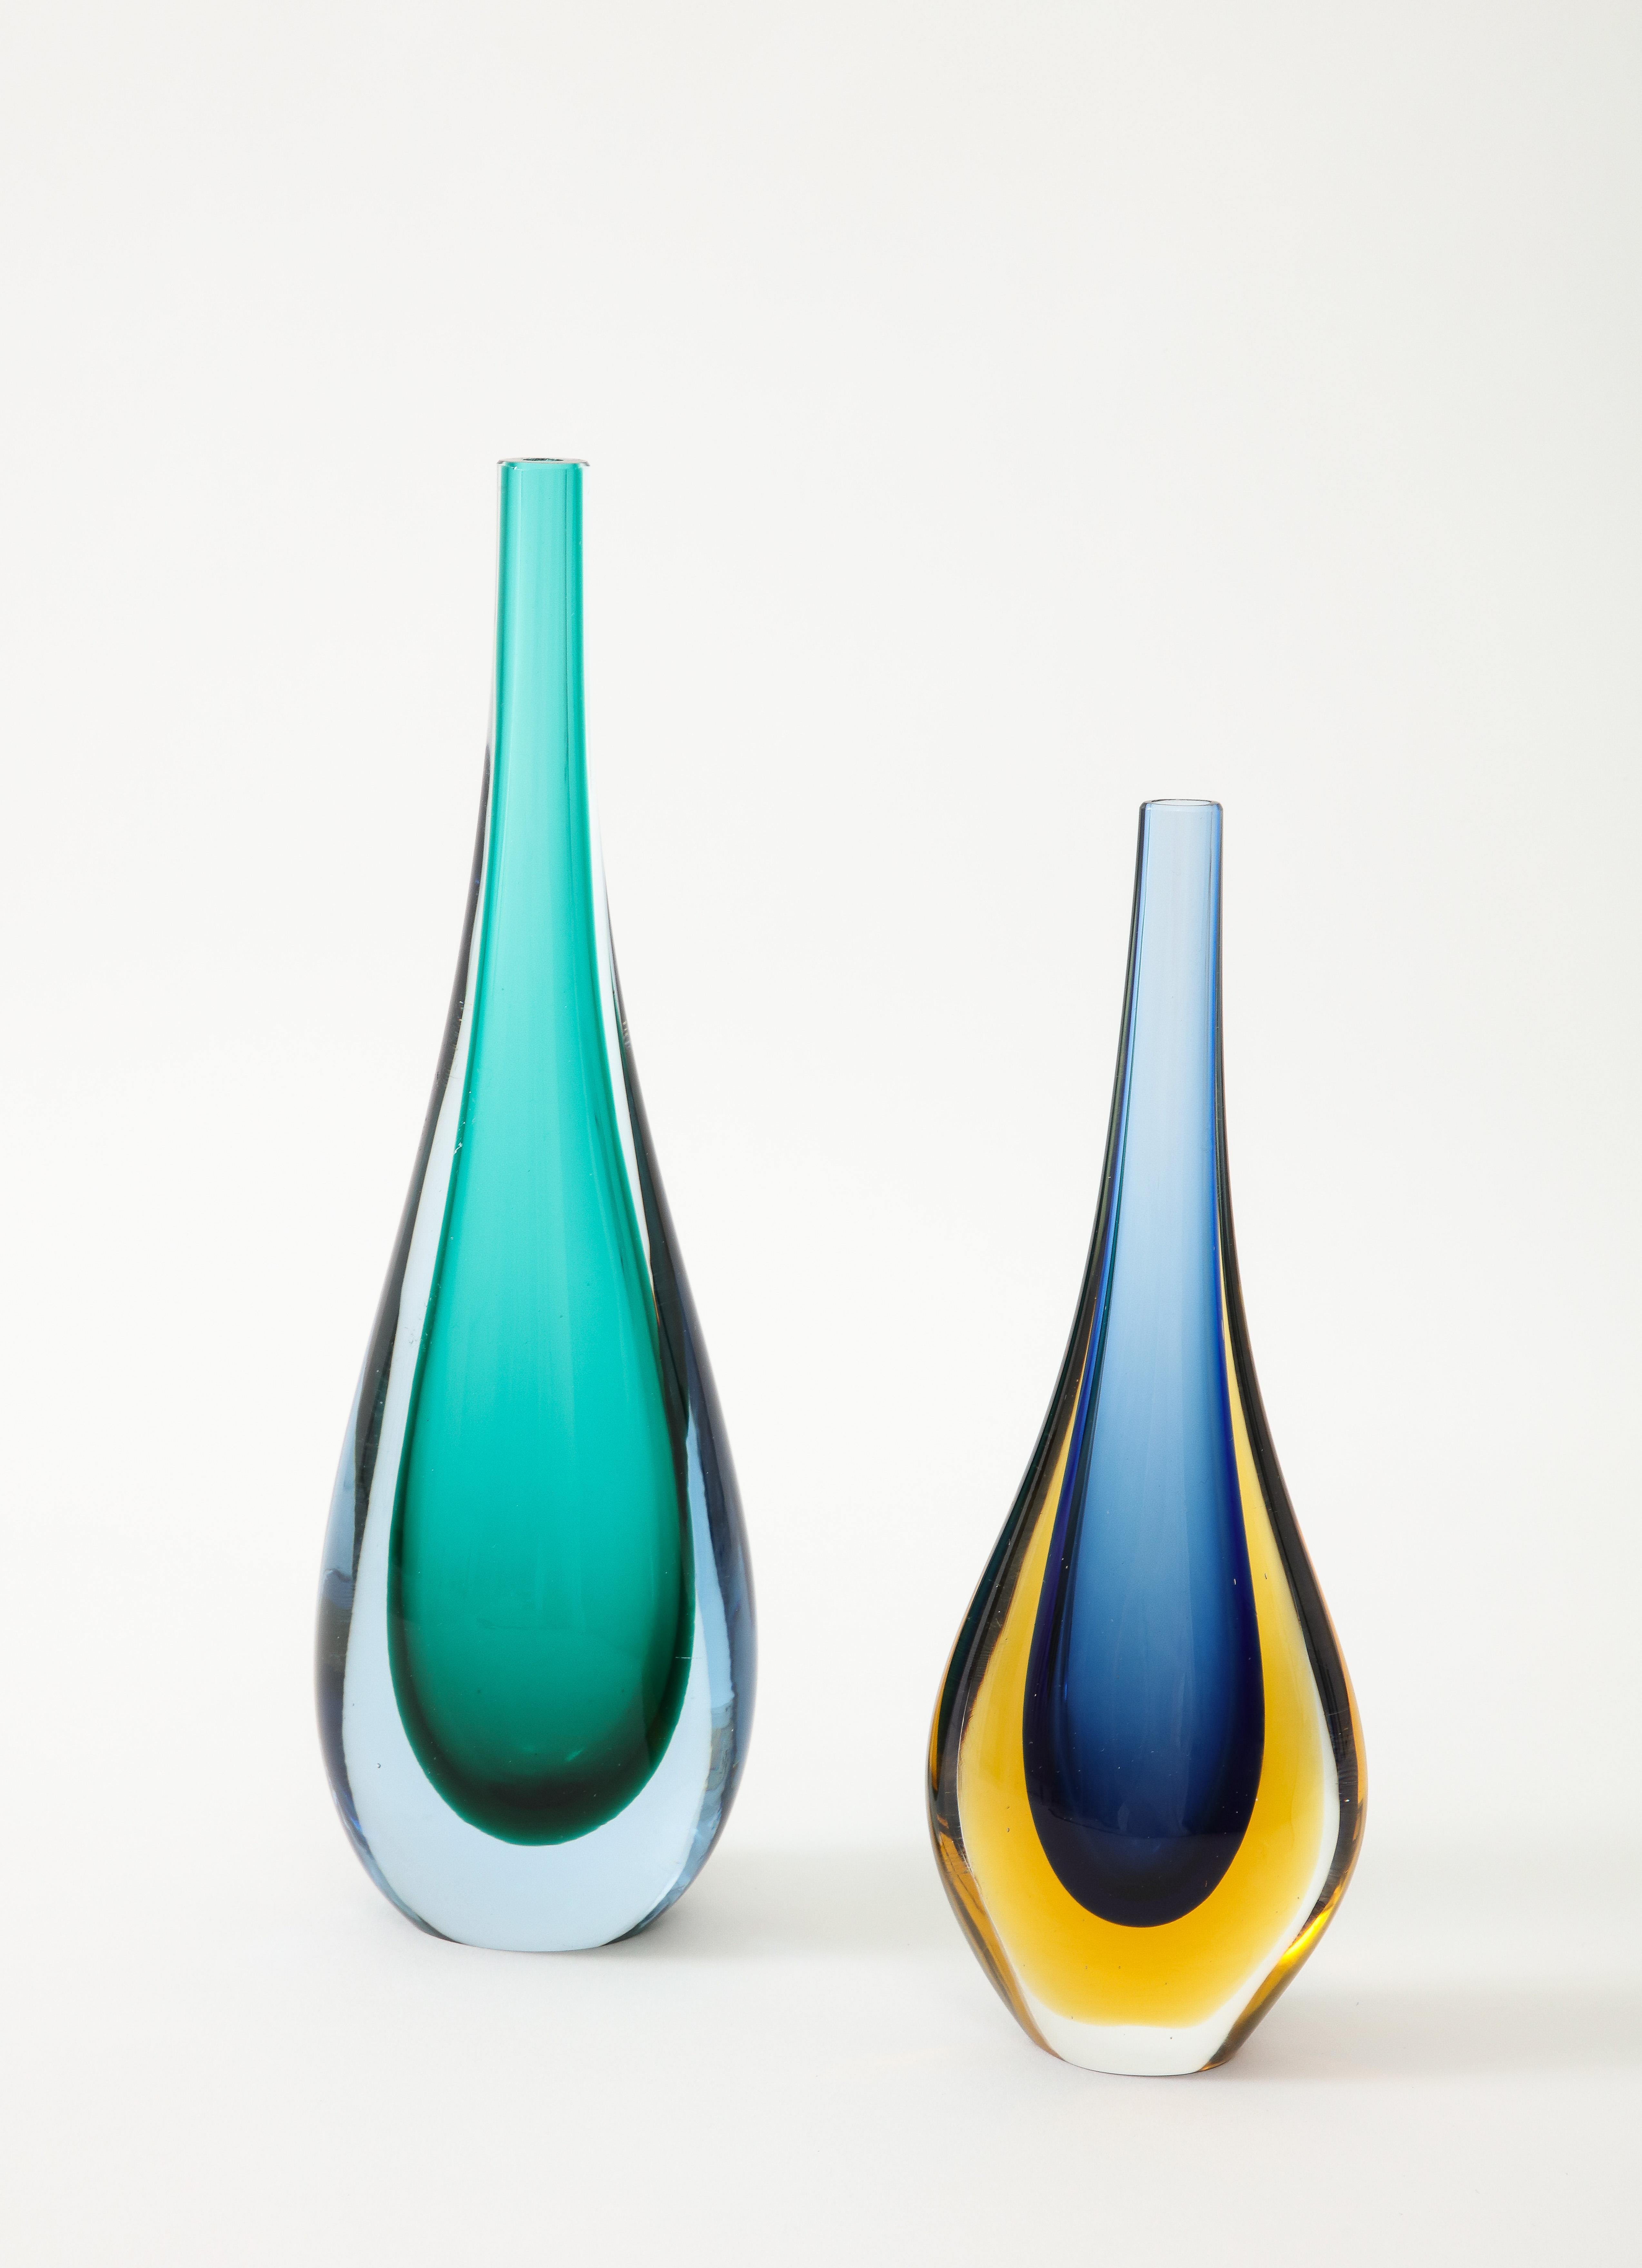 Two beautiful  1960's Sommerso hand blown Murano glass tear drop vases with
long necks.
The wonderful contrasting colors between the Blue and Yellow vase is Exquisite in person, and pairs very nicely with the Green one.
The Larger Green vase is